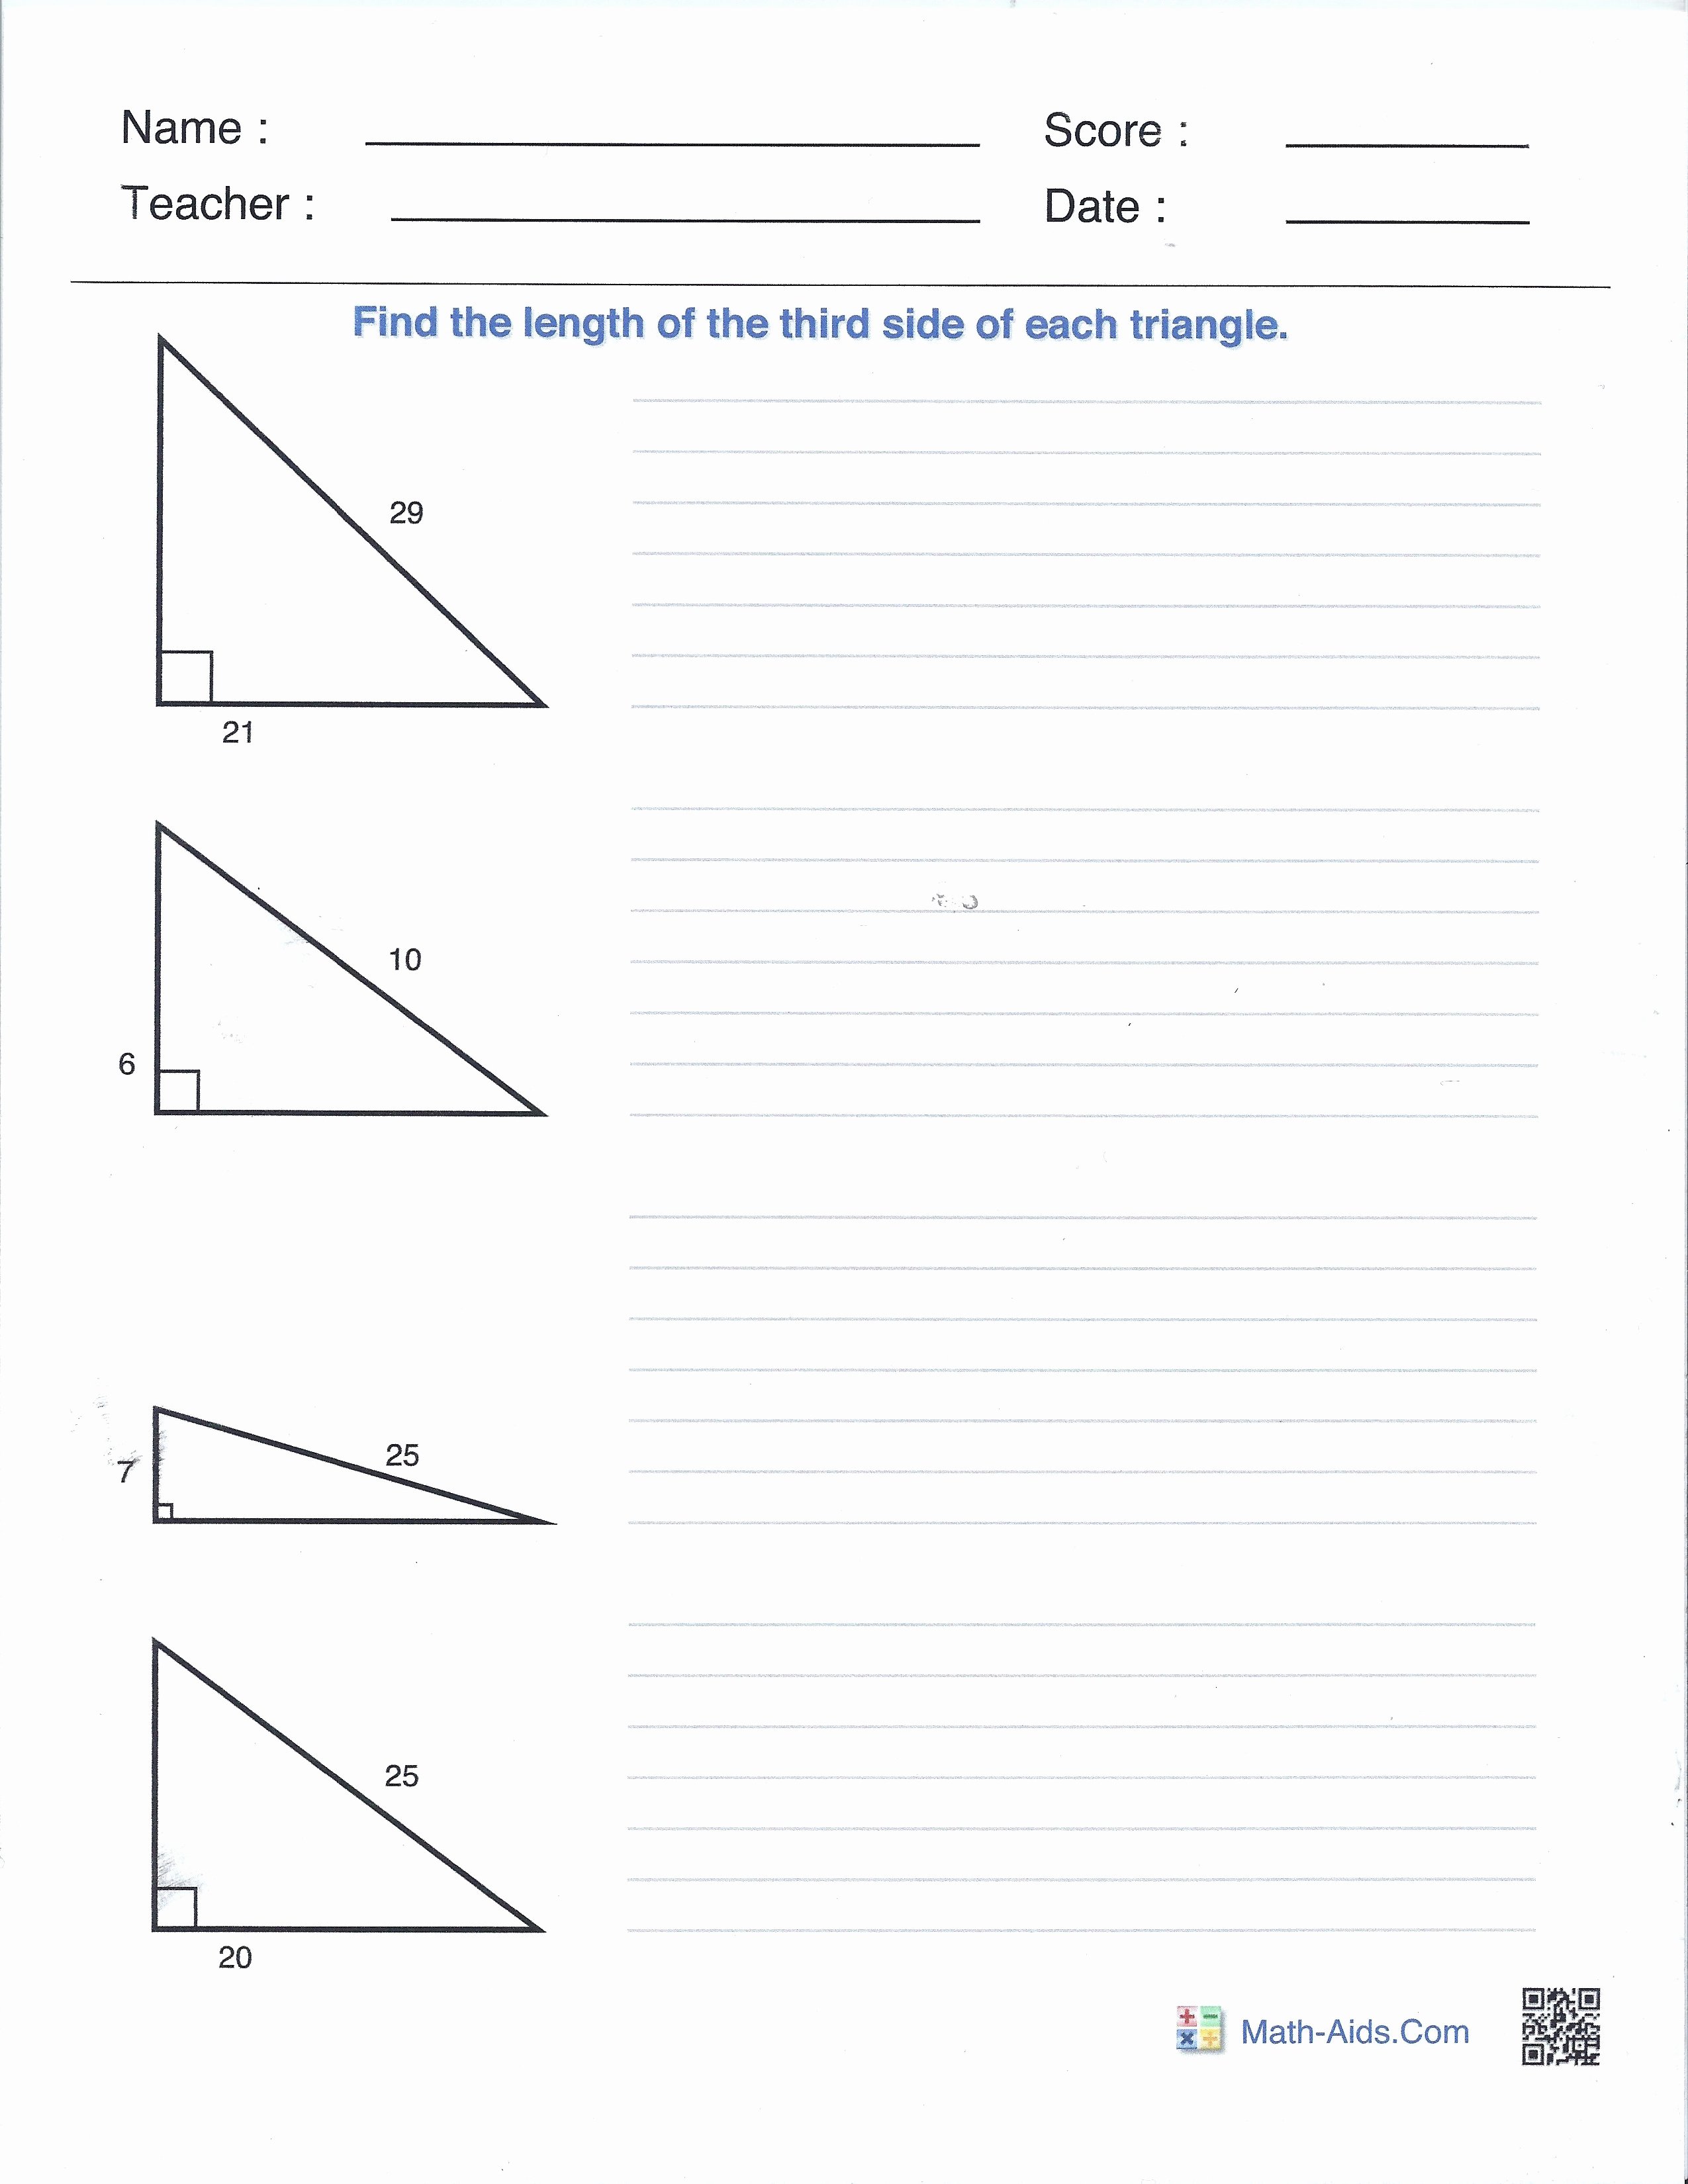 Pythagorean theorem Practice Worksheet Fresh Right Angles and the Pythagorean theorem